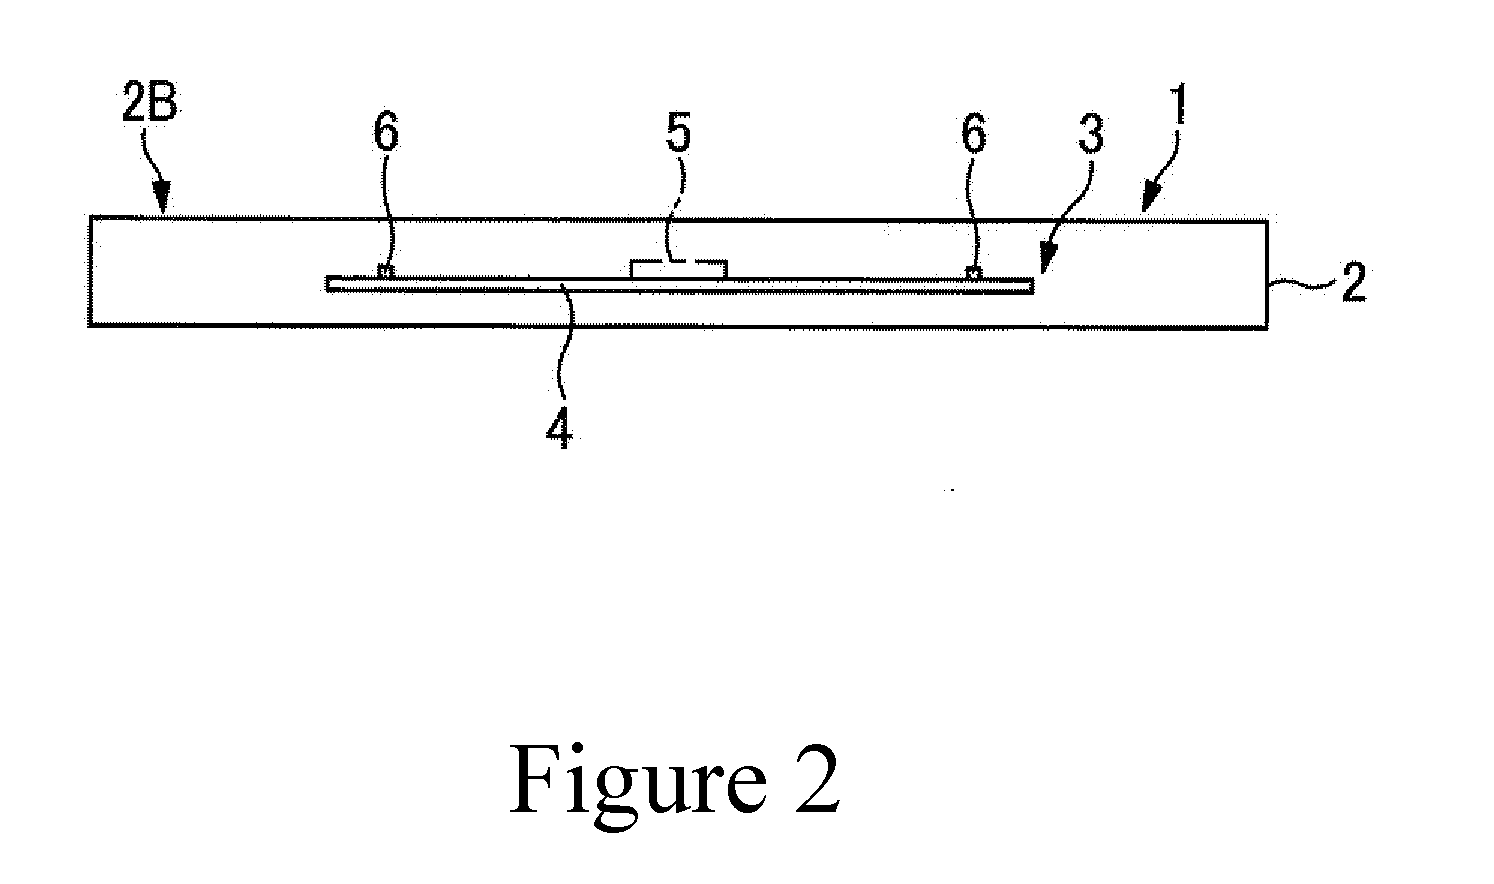 RFID tag and method of attaching the same